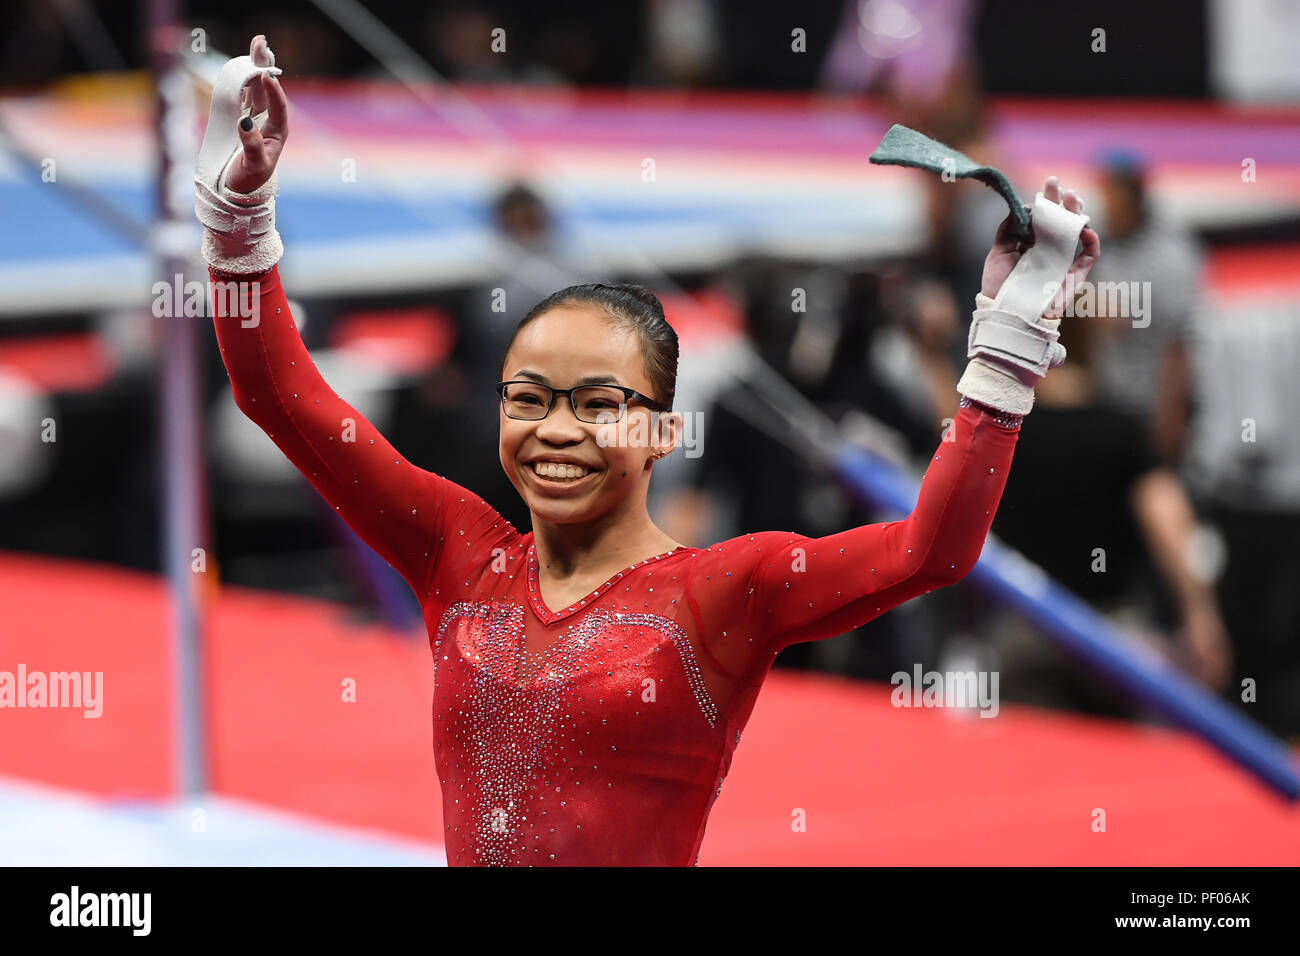 Boston, Massachussetts, USA. 17th Aug, 2018. MORGAN HURD waves to fans during the first round of competition at TD Garden in Boston, Massachusetts. Credit: Amy Sanderson/ZUMA Wire/Alamy Live News Stock Photo